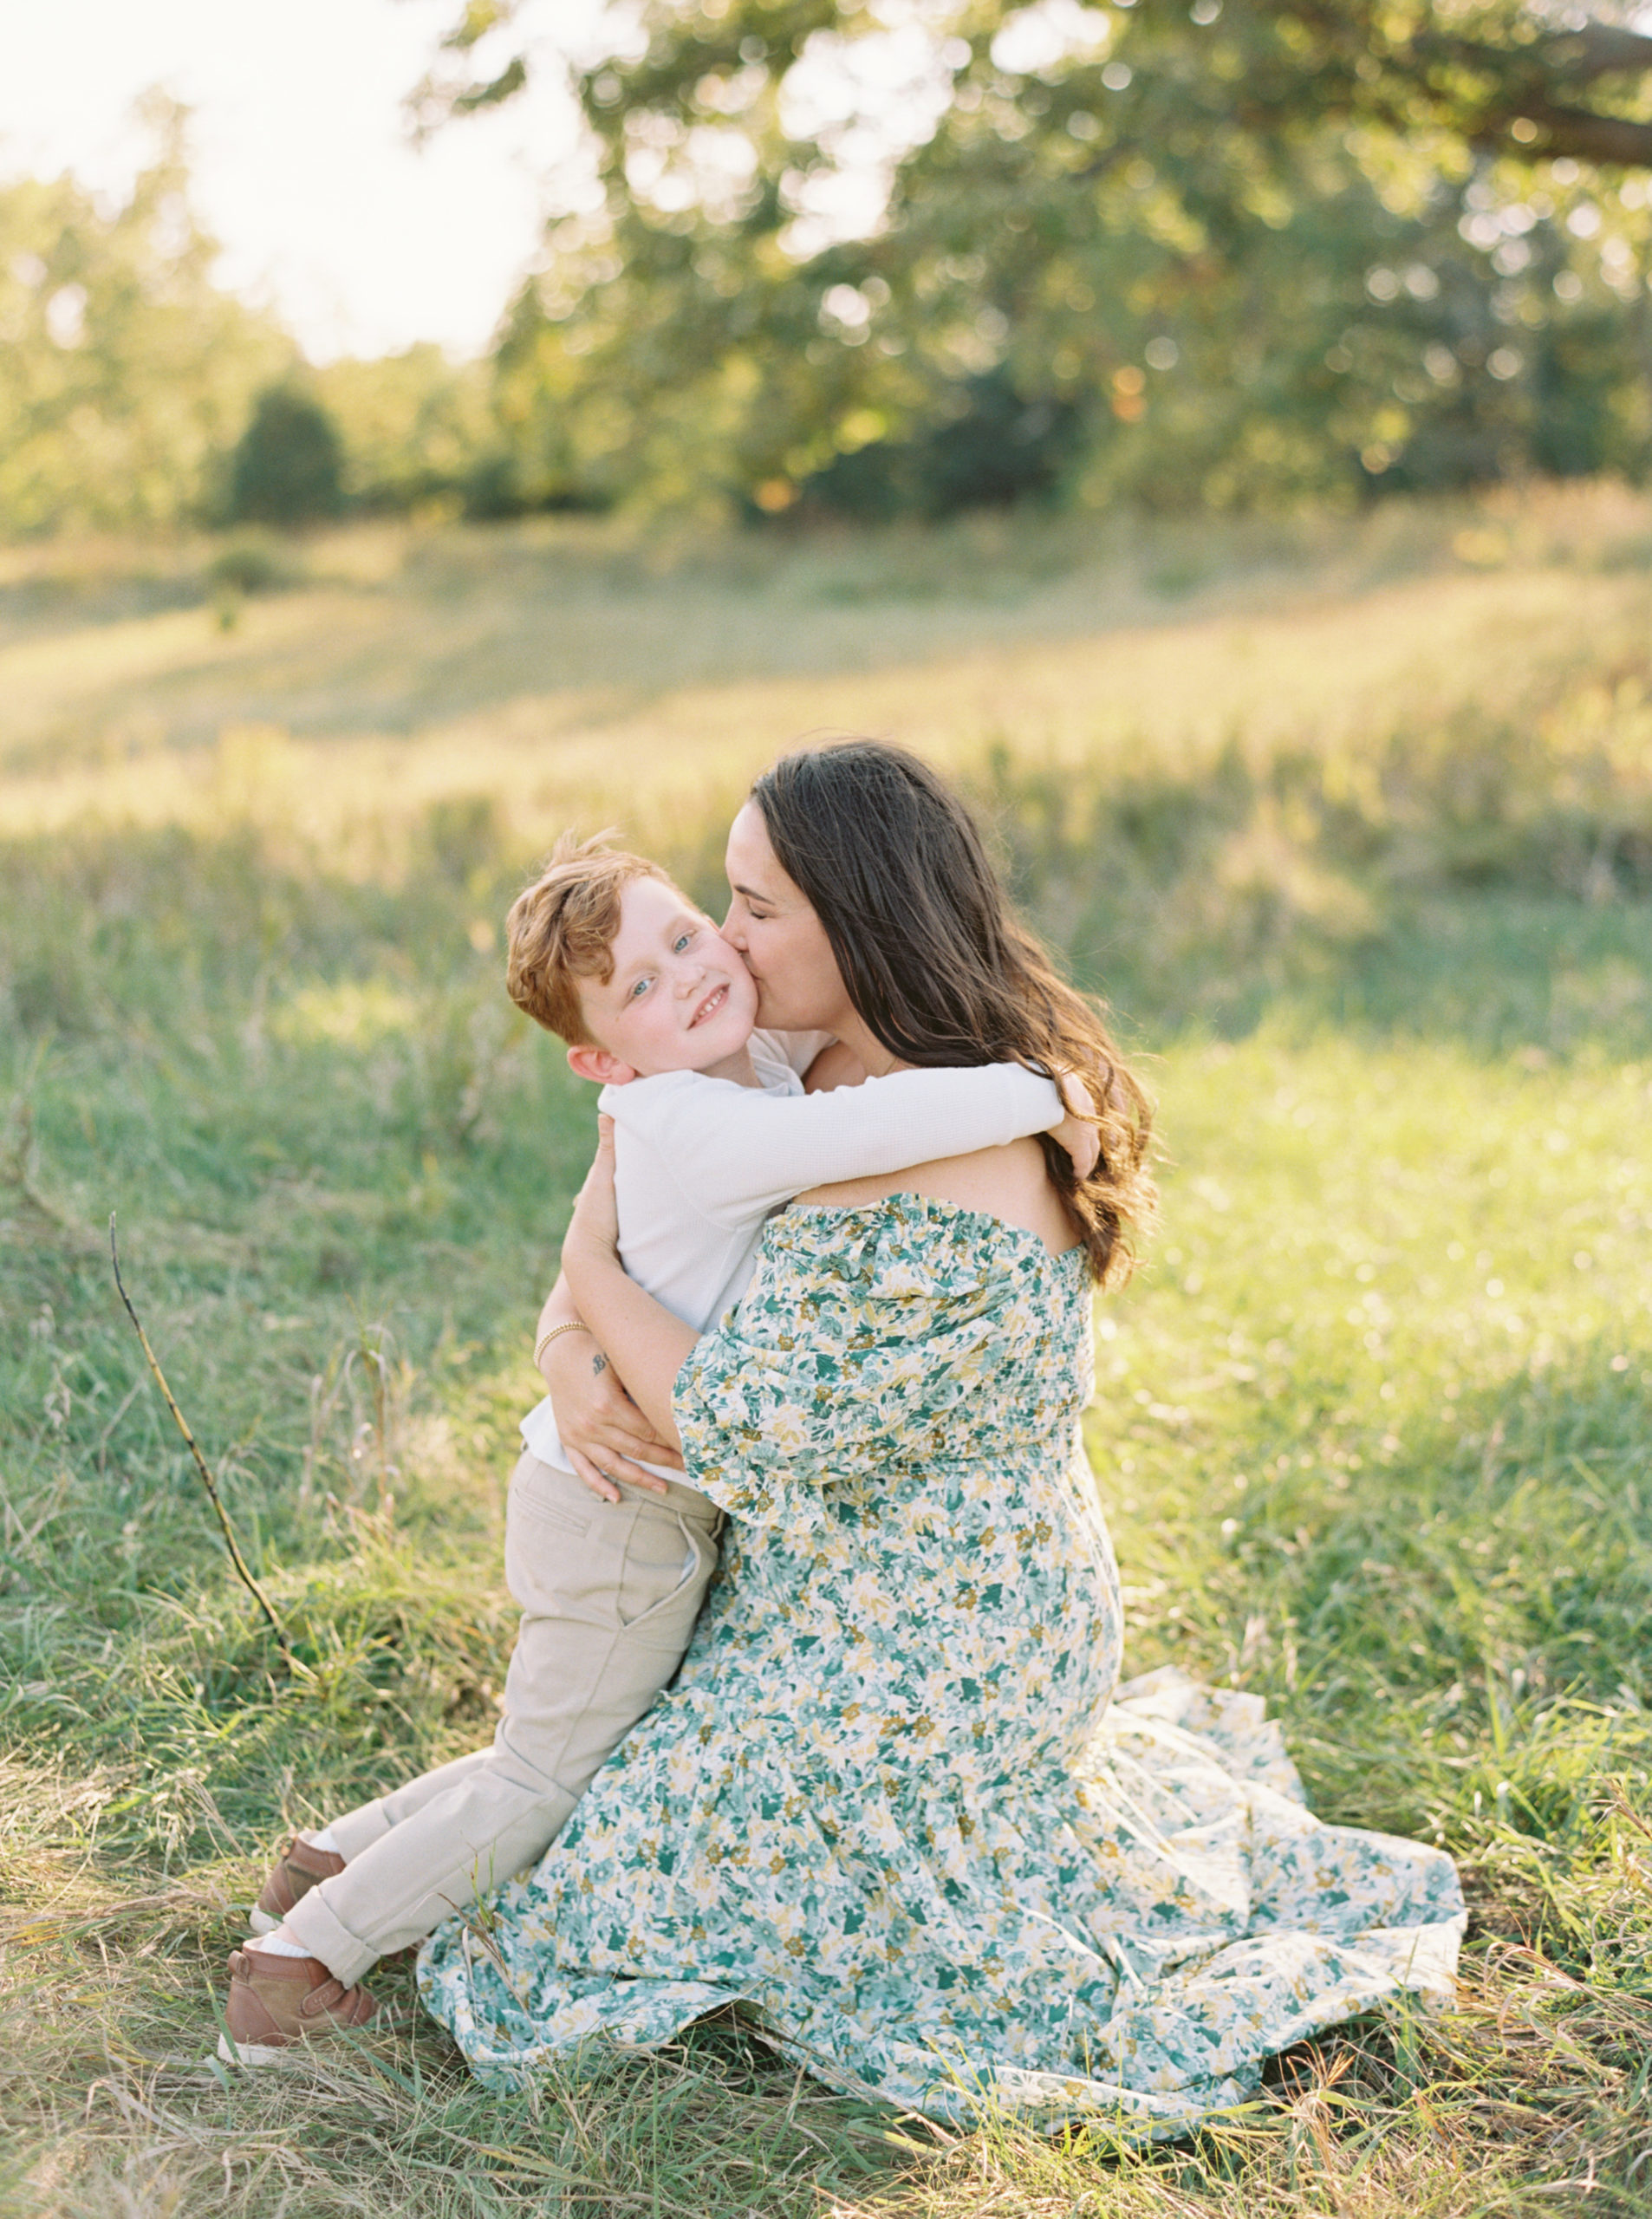 Mother and Son cuddling in a grassy green field setting in Shorewood in the summer